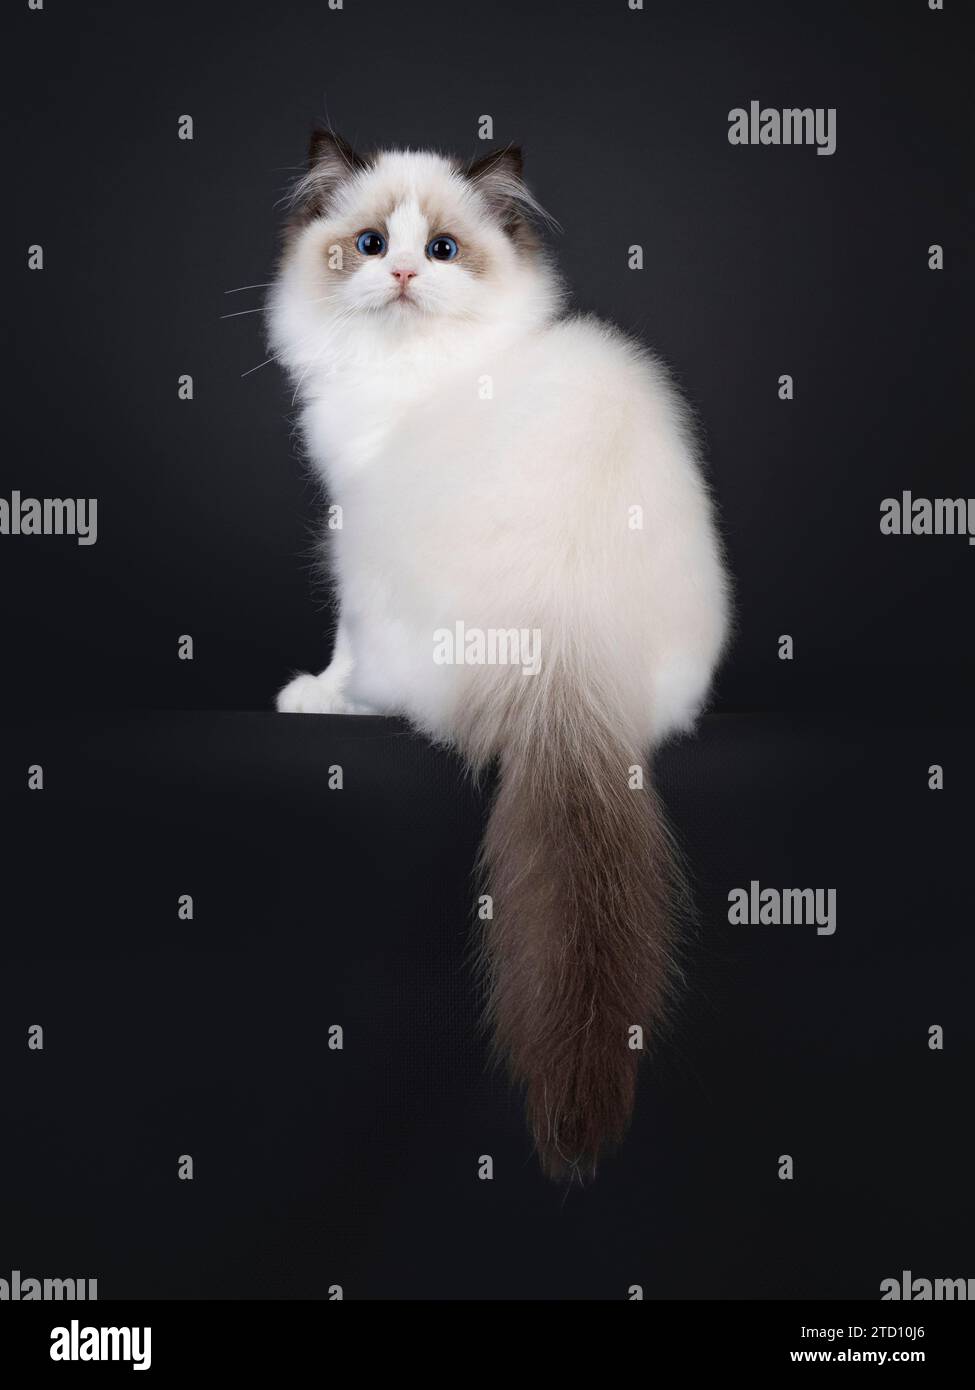 Pretty seal bicolored Ragdoll cat kitten, sitting backwards on edge. Looking over shoulder towards camera with deep blue eyes. Isolated on a black bac Stock Photo